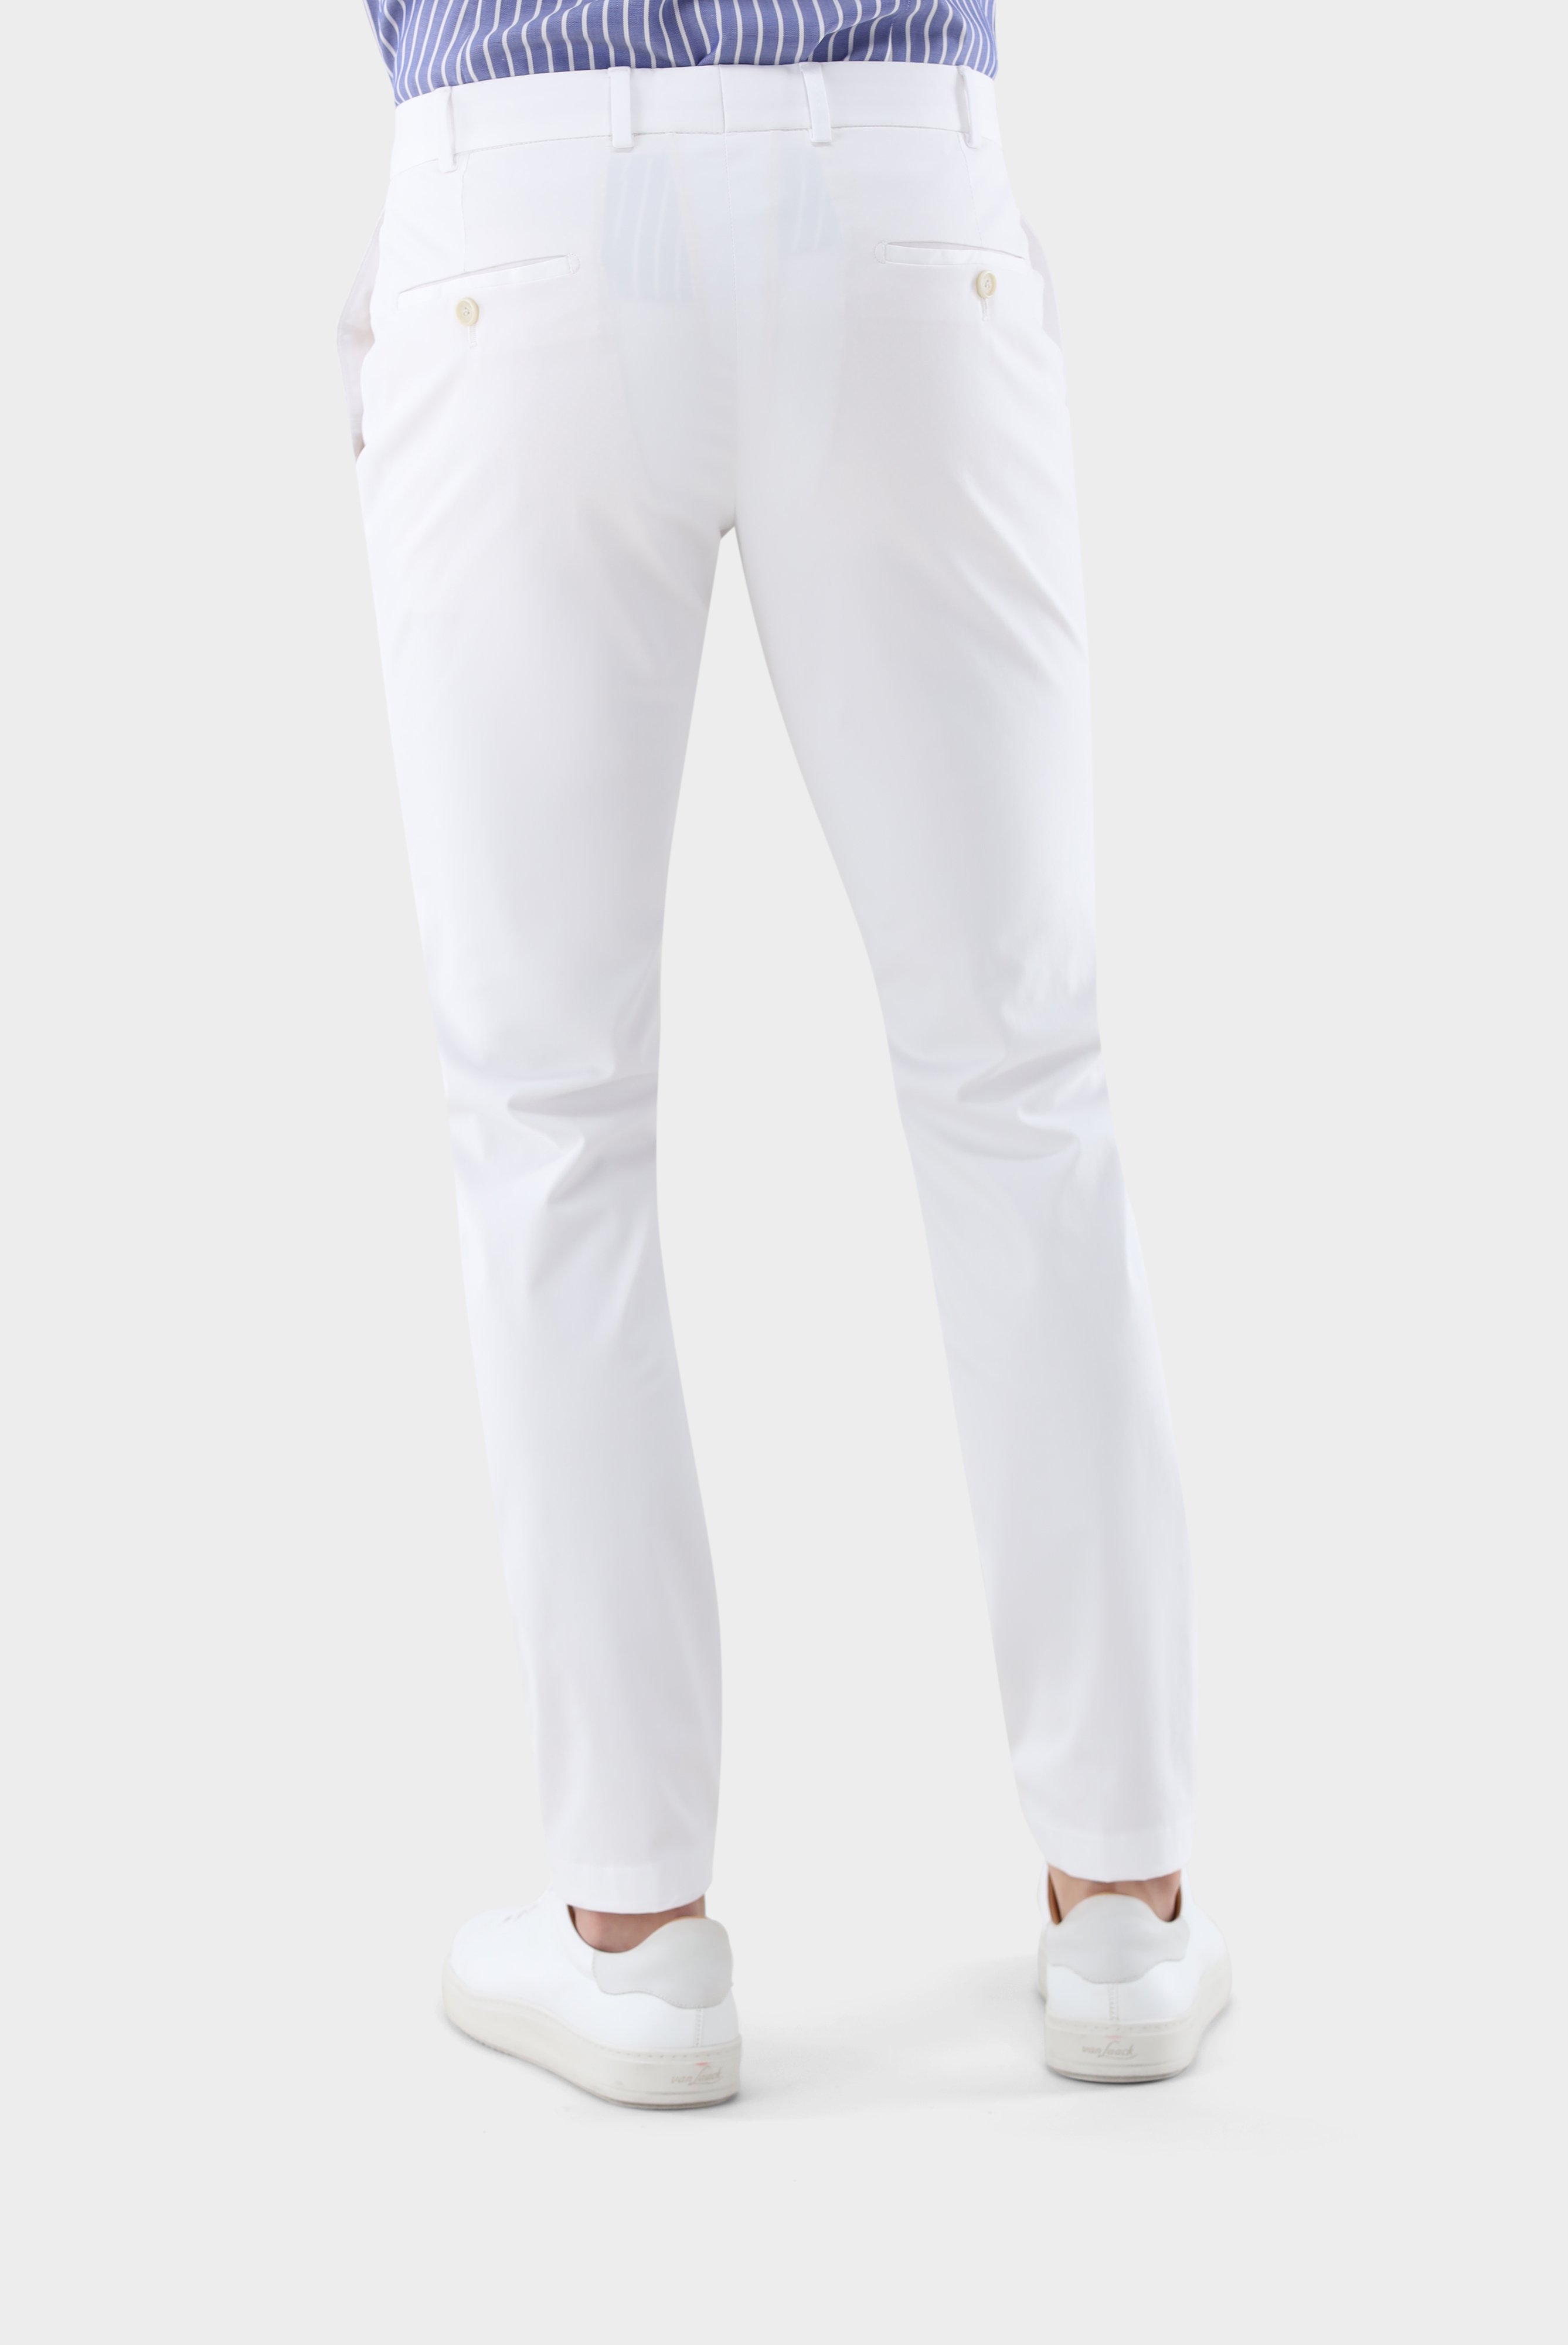 Jeans & Trousers+Cotton with Stretch Tapered Chinos+80.7858..J00151.000.46